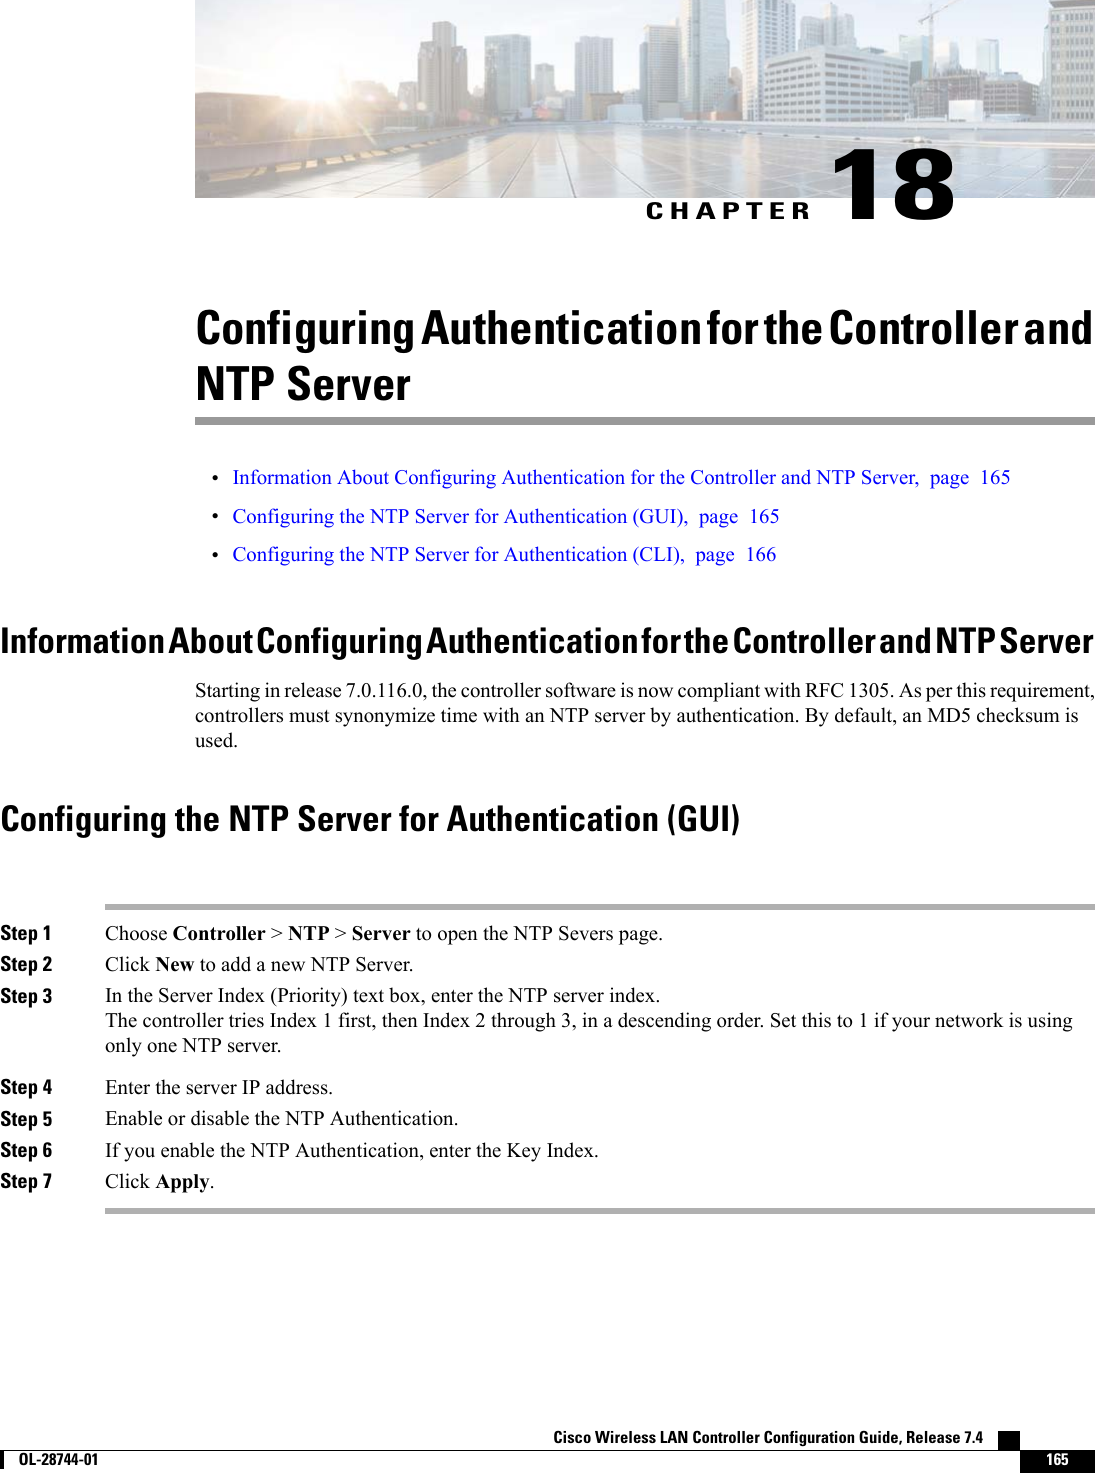 CHAPTER 18Configuring Authentication for the Controller andNTP Server•Information About Configuring Authentication for the Controller and NTP Server, page 165•Configuring the NTP Server for Authentication (GUI), page 165•Configuring the NTP Server for Authentication (CLI), page 166Information About Configuring Authentication for the Controller and NTP ServerStarting in release 7.0.116.0, the controller software is now compliant with RFC 1305. As per this requirement,controllers must synonymize time with an NTP server by authentication. By default, an MD5 checksum isused.Configuring the NTP Server for Authentication (GUI)Step 1 Choose Controller &gt;NTP &gt;Server to open the NTP Severs page.Step 2 Click New to add a new NTP Server.Step 3 In the Server Index (Priority) text box, enter the NTP server index.The controller tries Index 1 first, then Index 2 through 3, in a descending order. Set this to 1 if your network is usingonly one NTP server.Step 4 Enter the server IP address.Step 5 Enable or disable the NTP Authentication.Step 6 If you enable the NTP Authentication, enter the Key Index.Step 7 Click Apply.Cisco Wireless LAN Controller Configuration Guide, Release 7.4        OL-28744-01 165